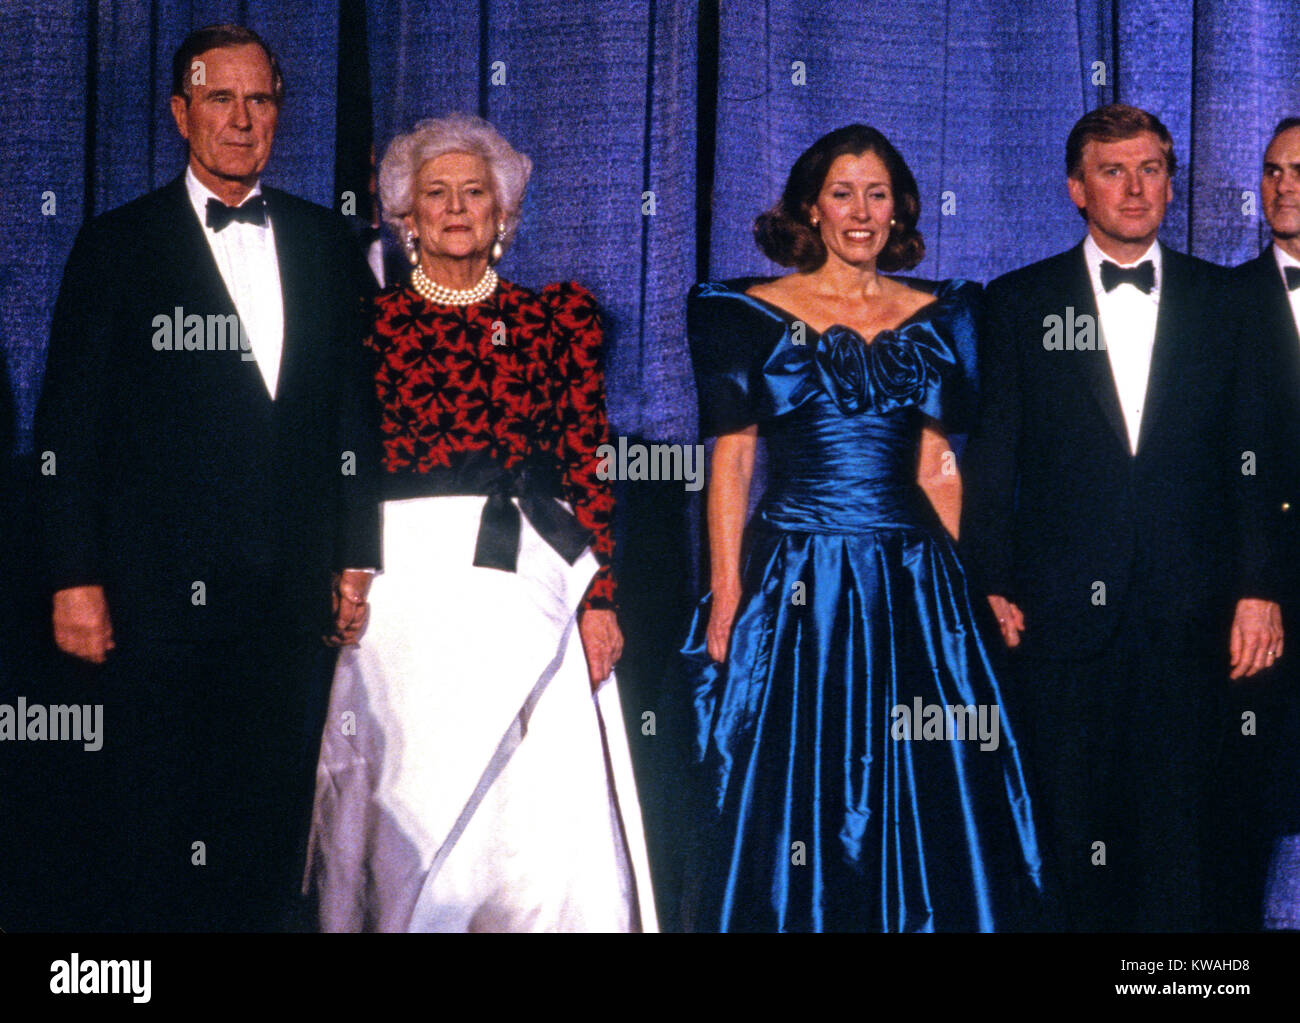 Washington, District of Columbia, USA. 18th Jan, 1989. From left to right: United States President-elect George H.W. Bush, Barbara Bush, Marilyn Quayle, and US Vice President-elect Dan Quayle, attends the Inaugural Gala at the Washington DC Convention Center in Washington, DC on January 18 1989. Credit: David Burnett/Pool via CNP Credit: David Burnett/CNP/ZUMA Wire/Alamy Live News Stock Photo